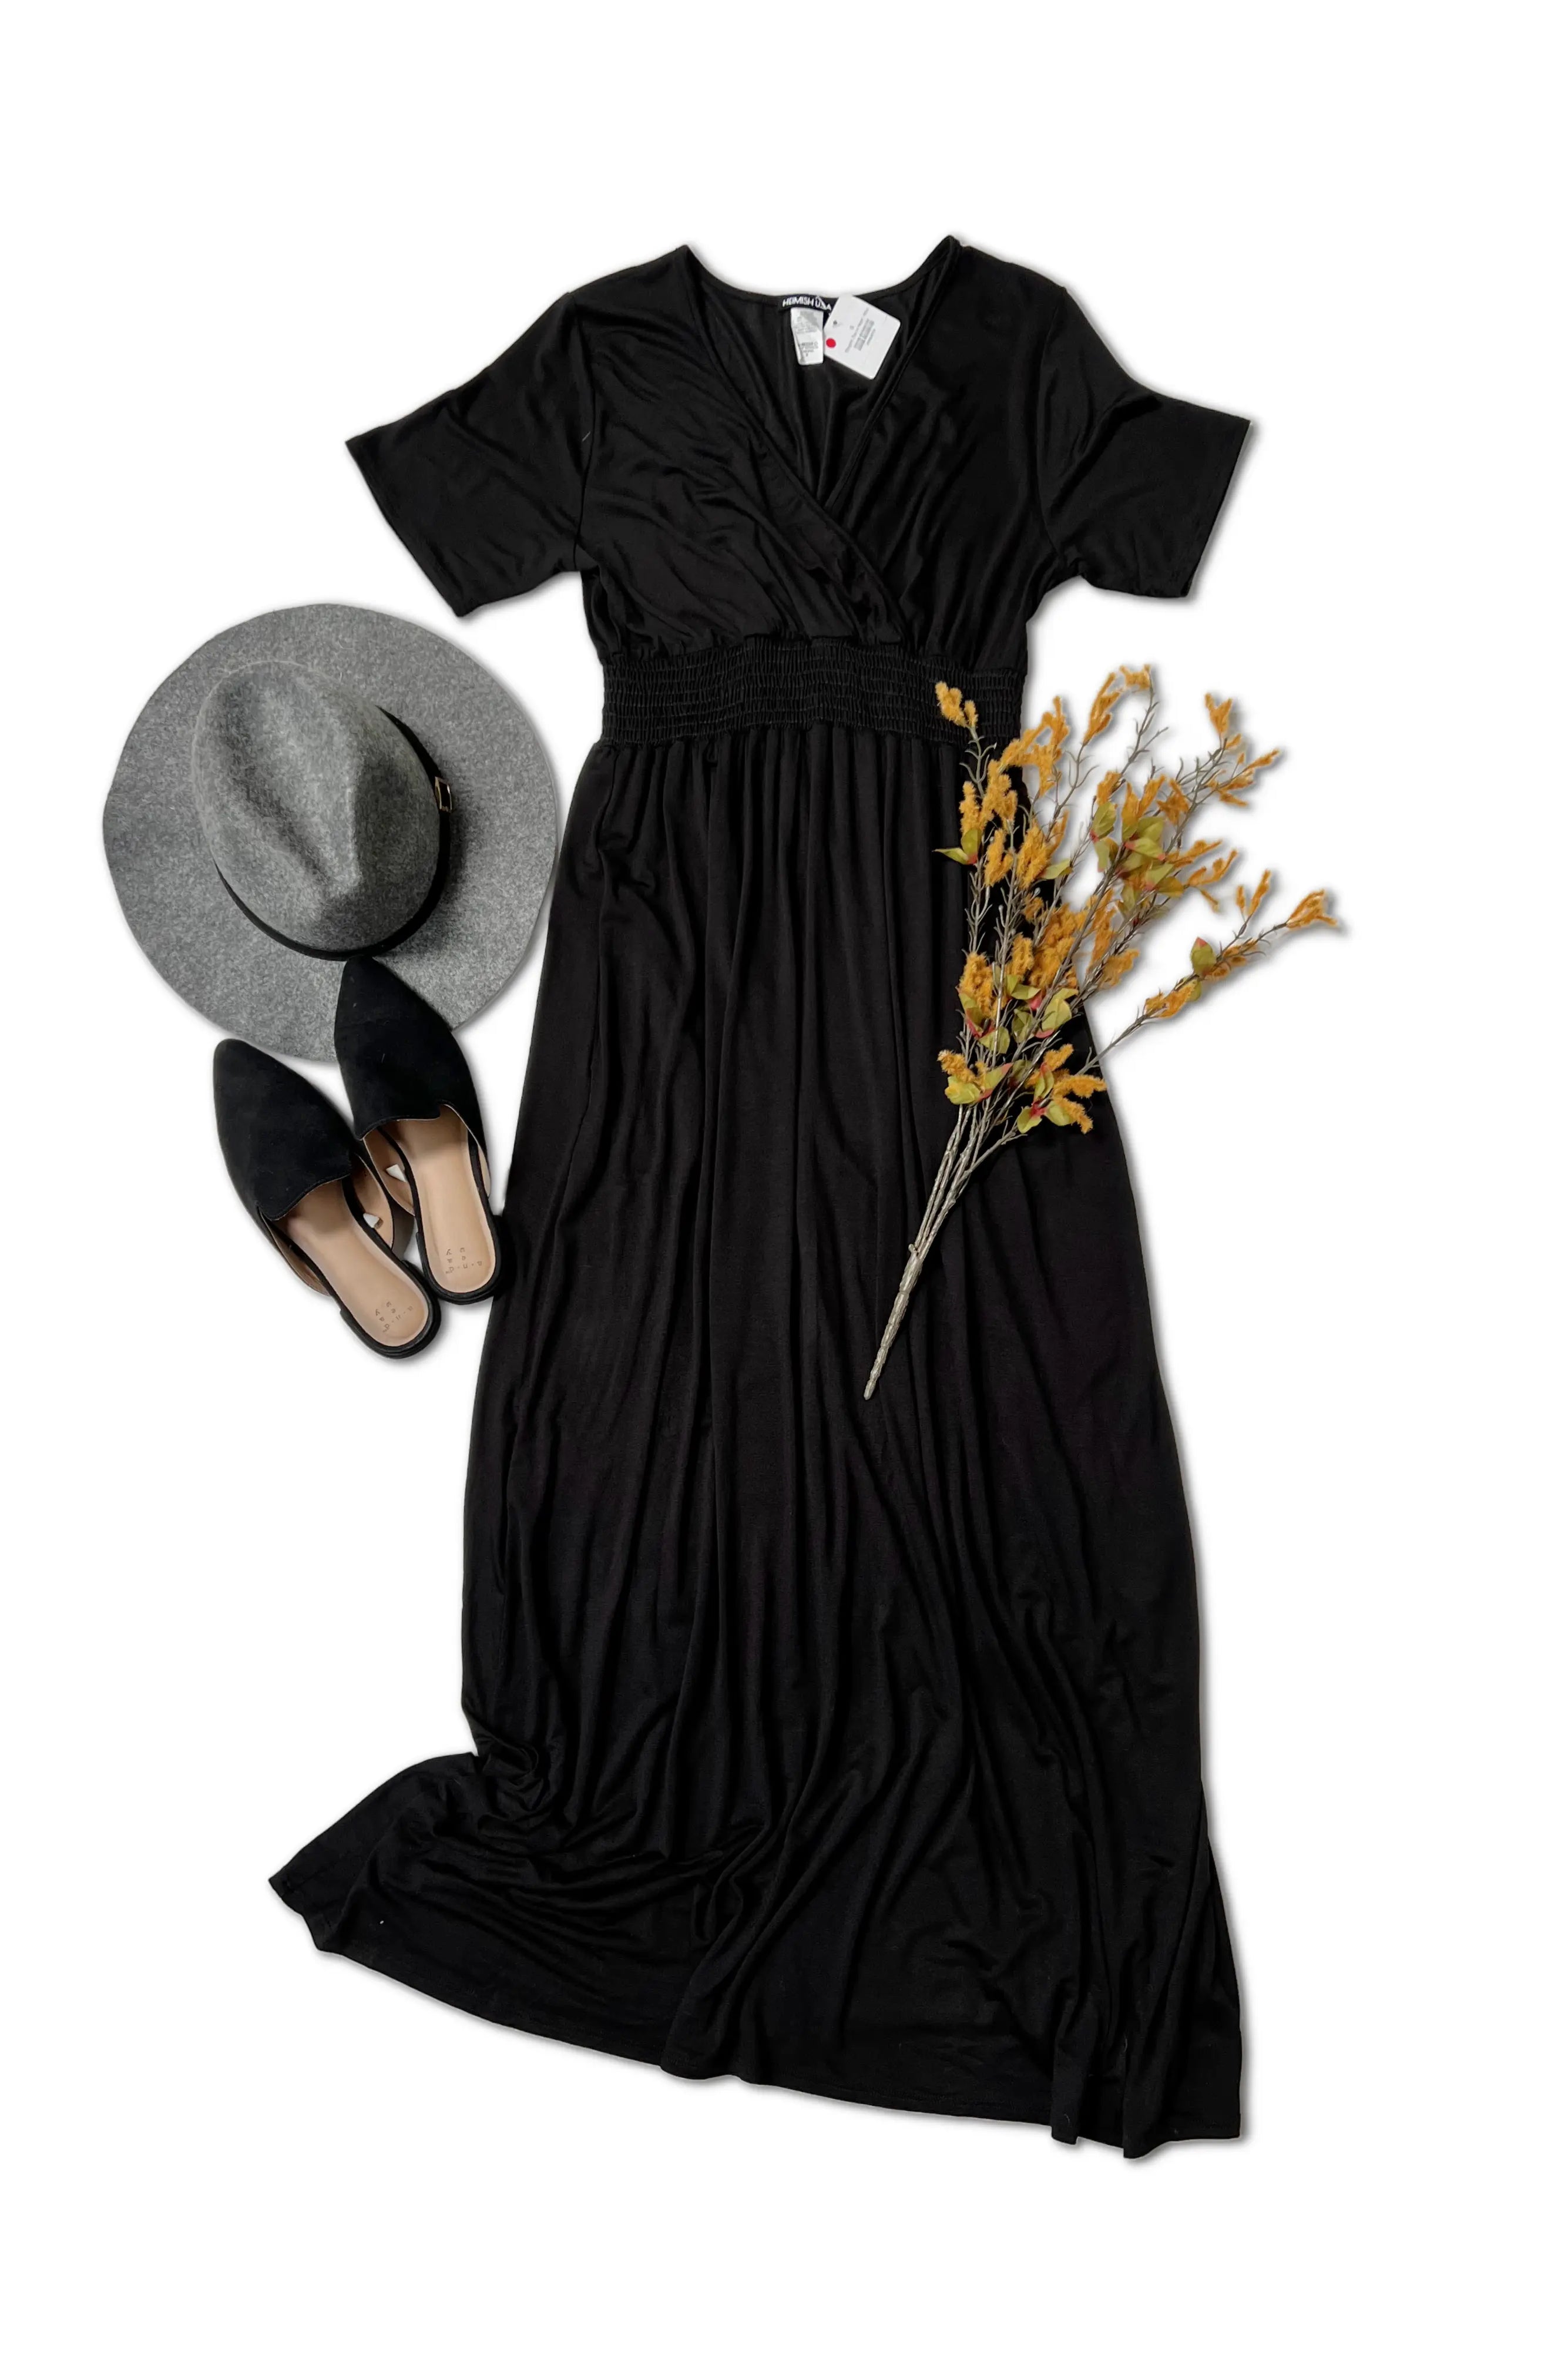 Elegant, Day or Night - Maxi Boutique Simplified